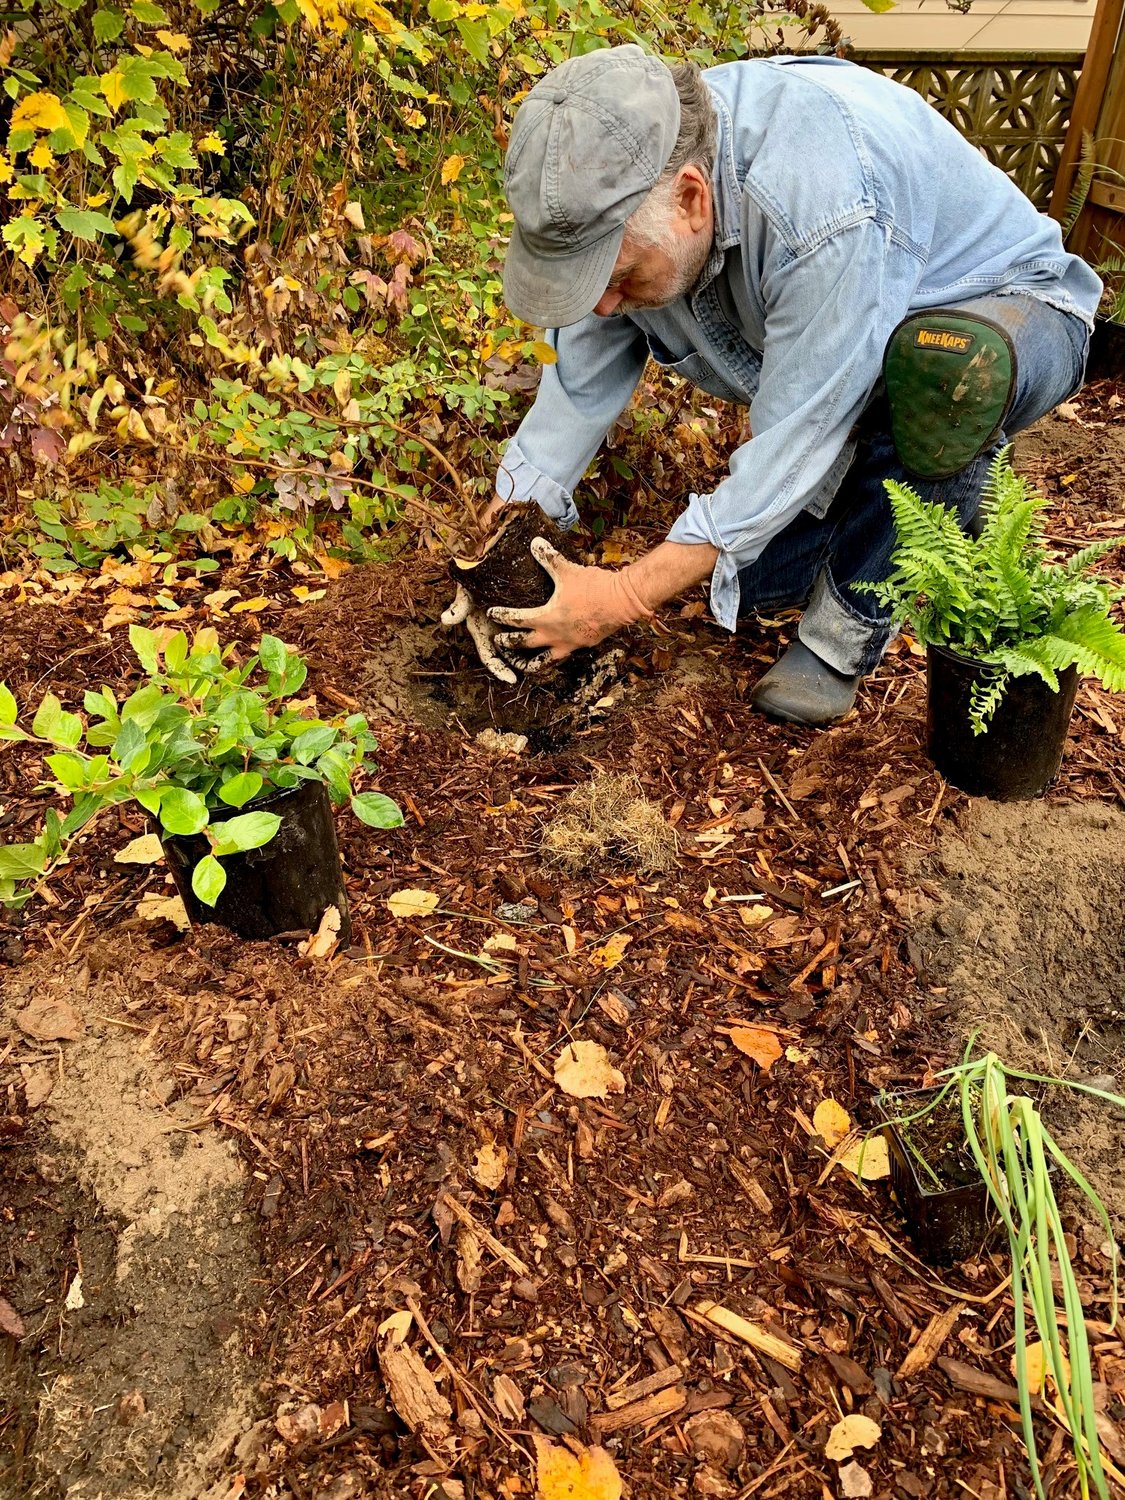 Birch Bay resident Alan Sanders participates in the native landscaping program’s planting party on October 22.